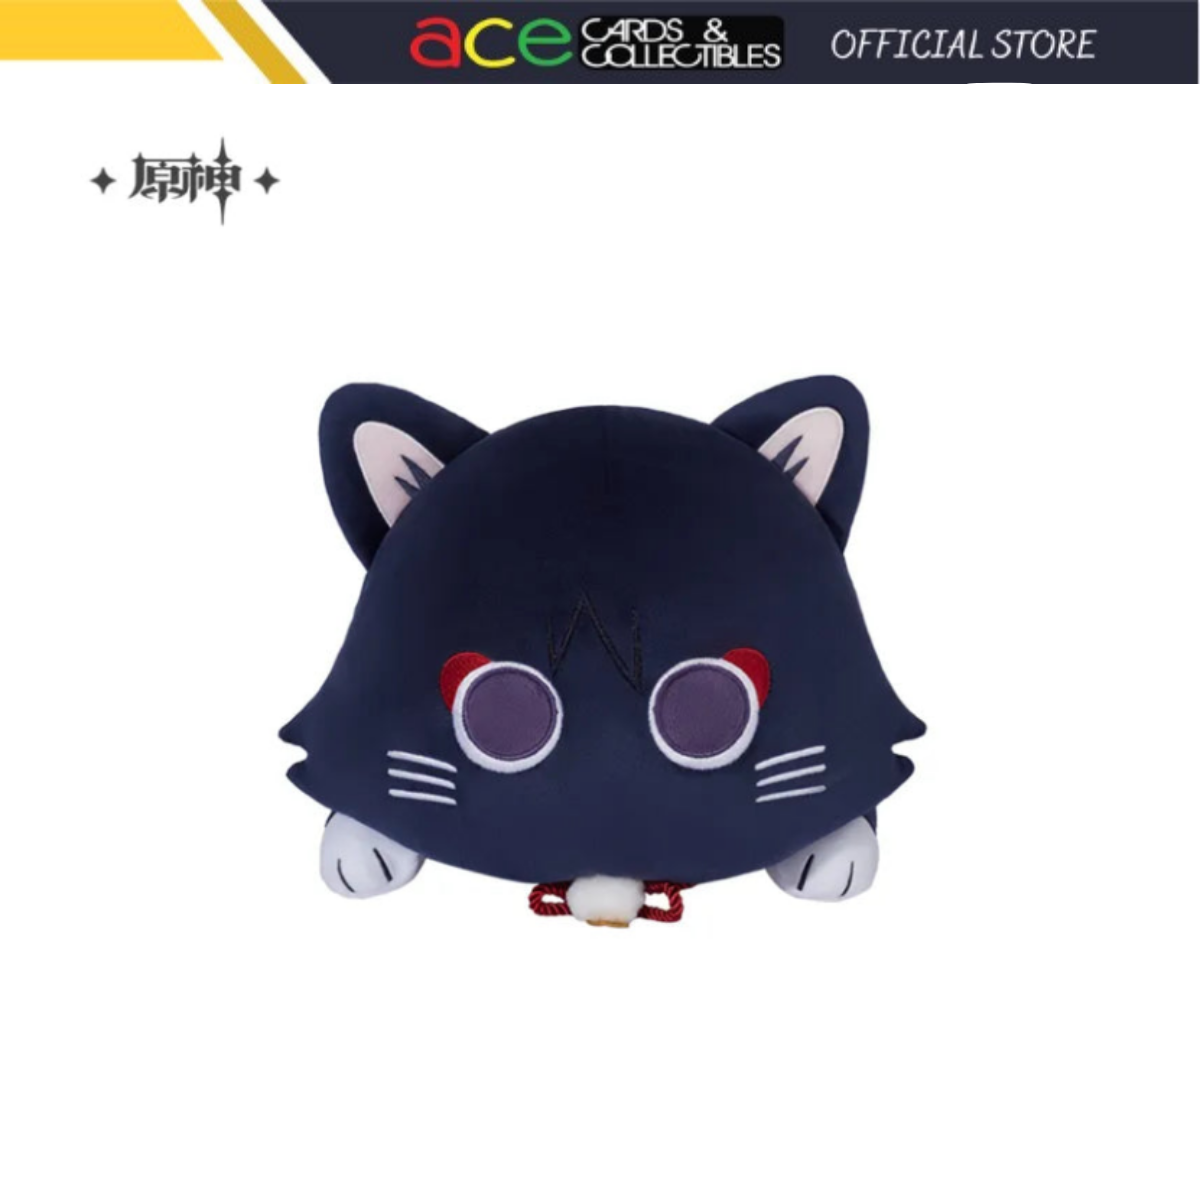 miHoYo Genshin Impact &quot;Wanderer Meow Plush&quot; Fairy Tale Cat XL Plushie-miHoYo-Ace Cards &amp; Collectibles